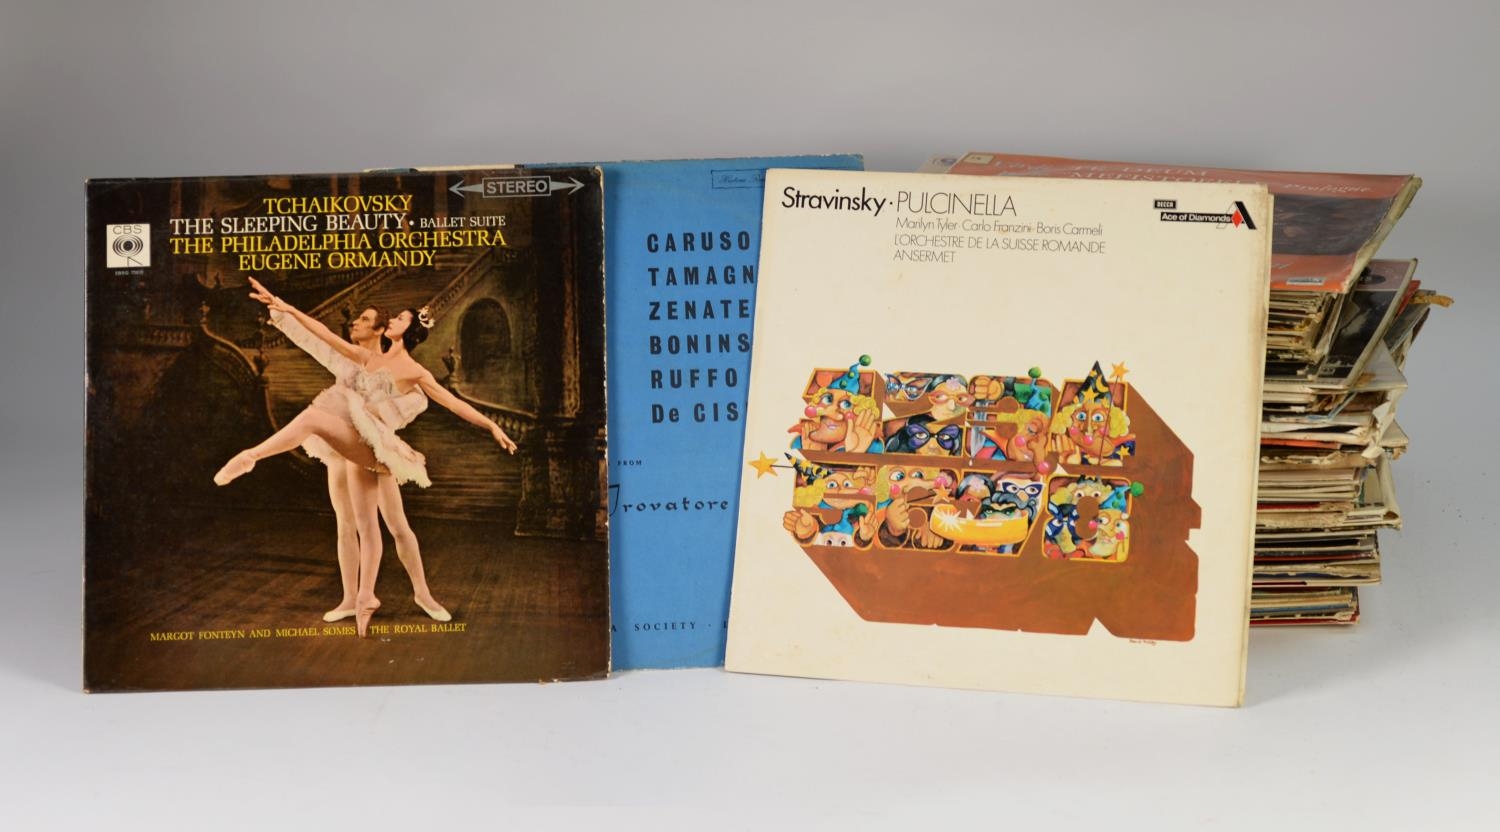 CLASSICAL VINYL RECORDS. MRAWINSKIJ - Tschaikowsky, Sinfonie nr 4, DGG, tulip labels, RED Stereo - Image 2 of 2